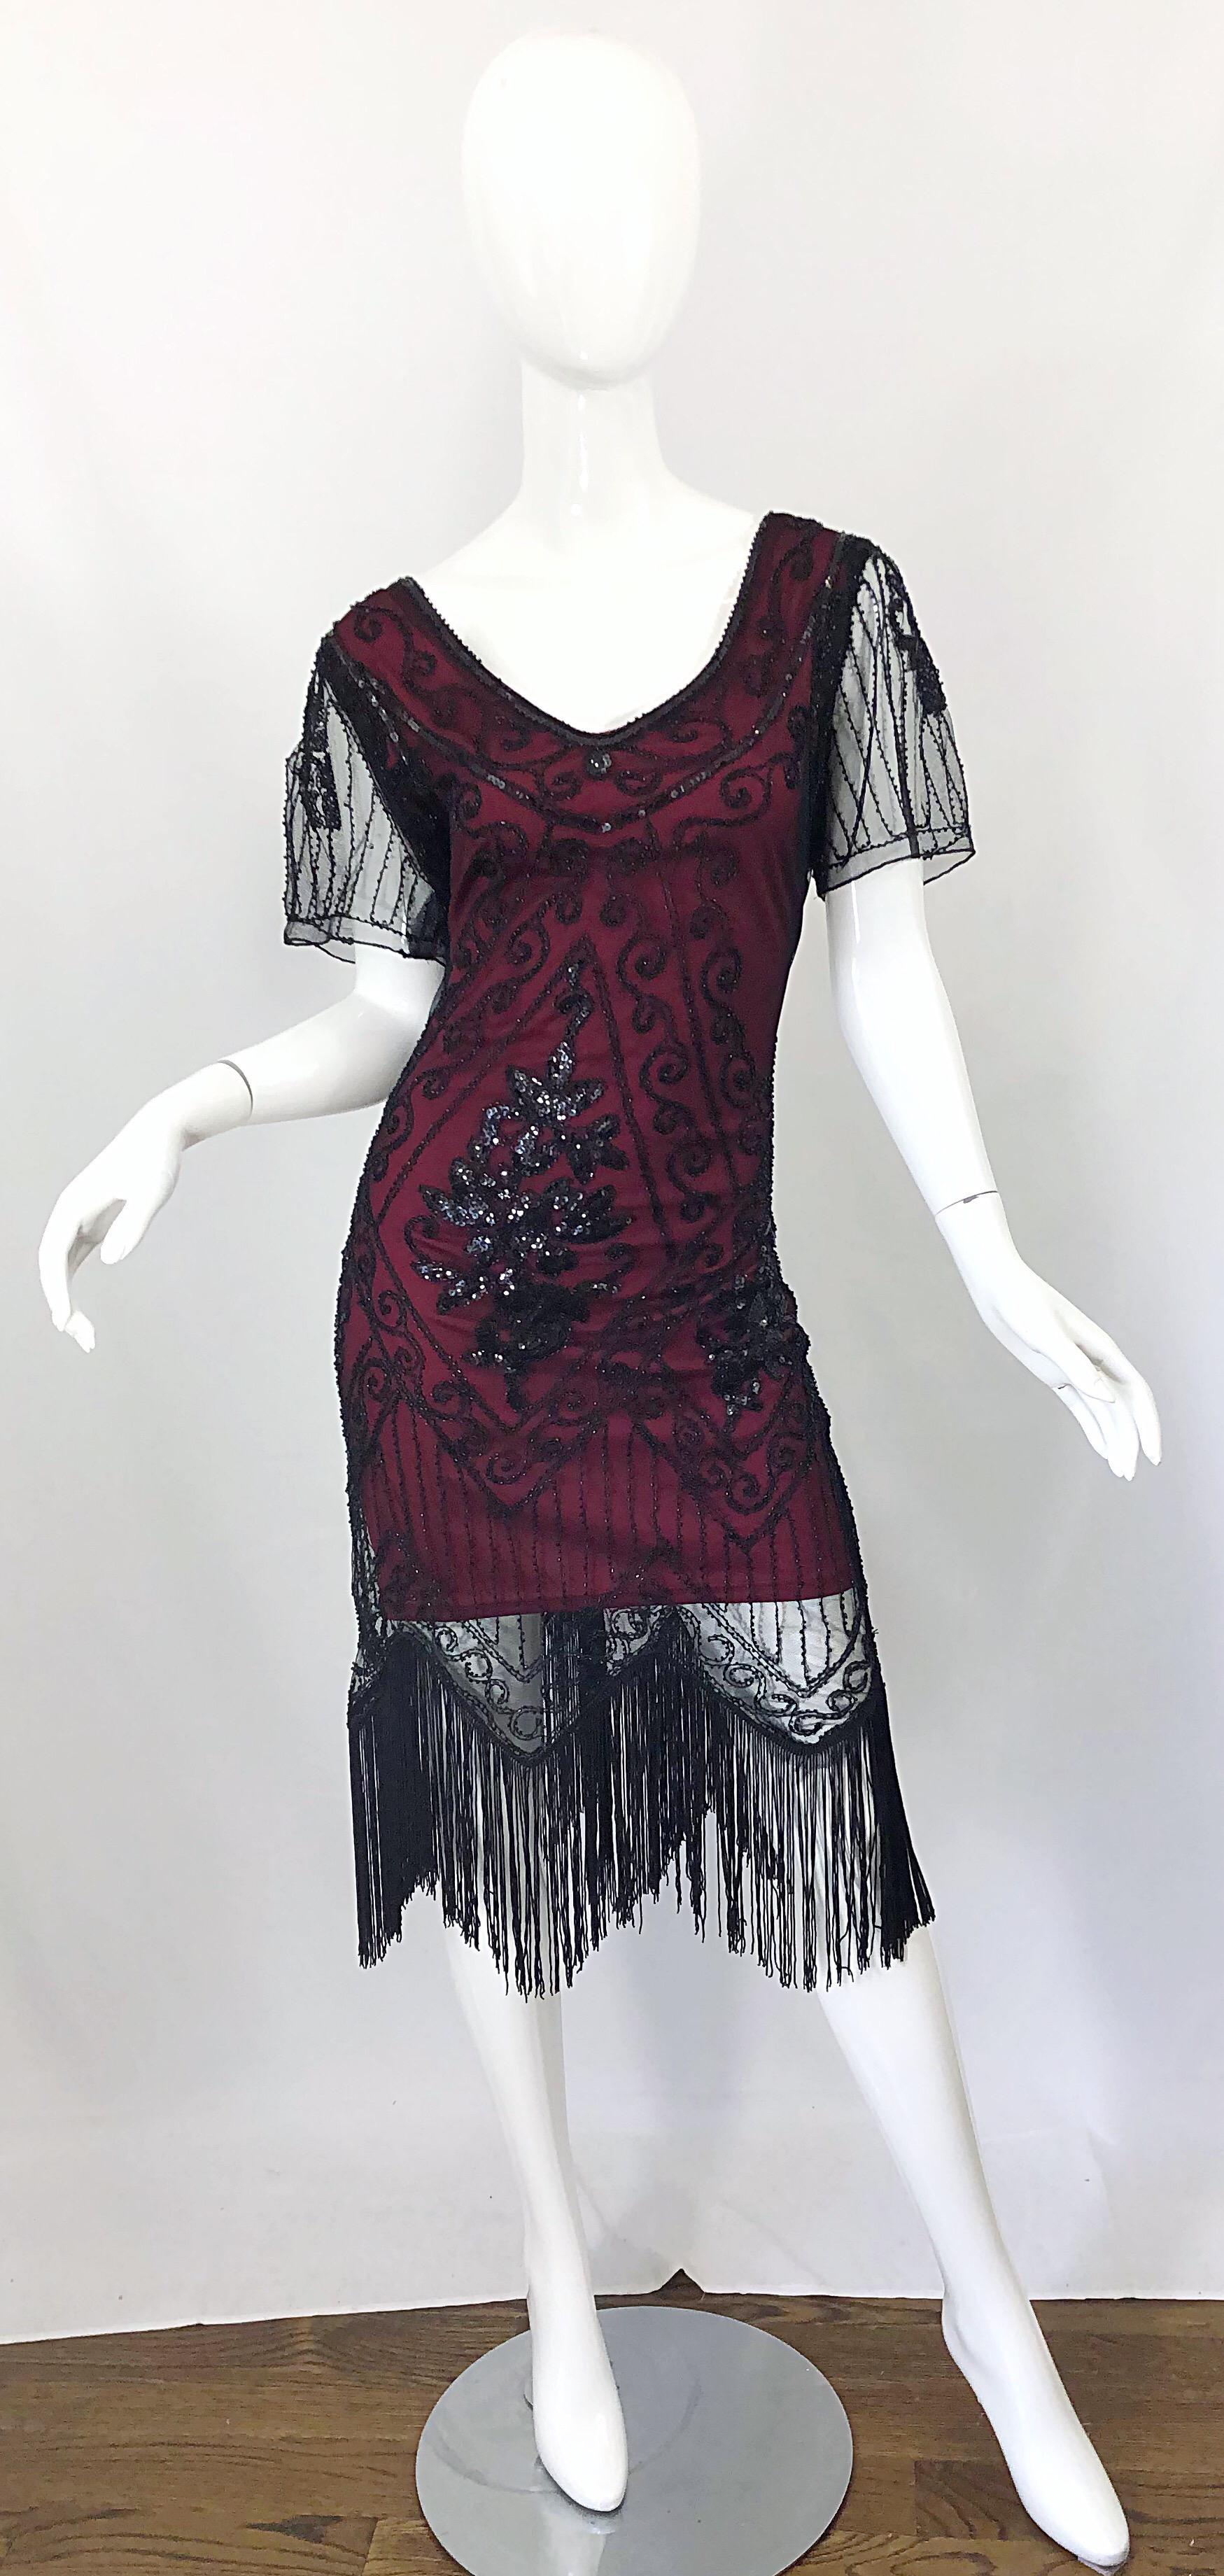 Incredible 90s does 20s black and red / maroon burgundy lace beaded fringe short sleeve flapper dress! Features a black mesh lace with thousands of hand-sewn black sequins and beads throughout. Burgundy underlay is made of jersey that stretches to